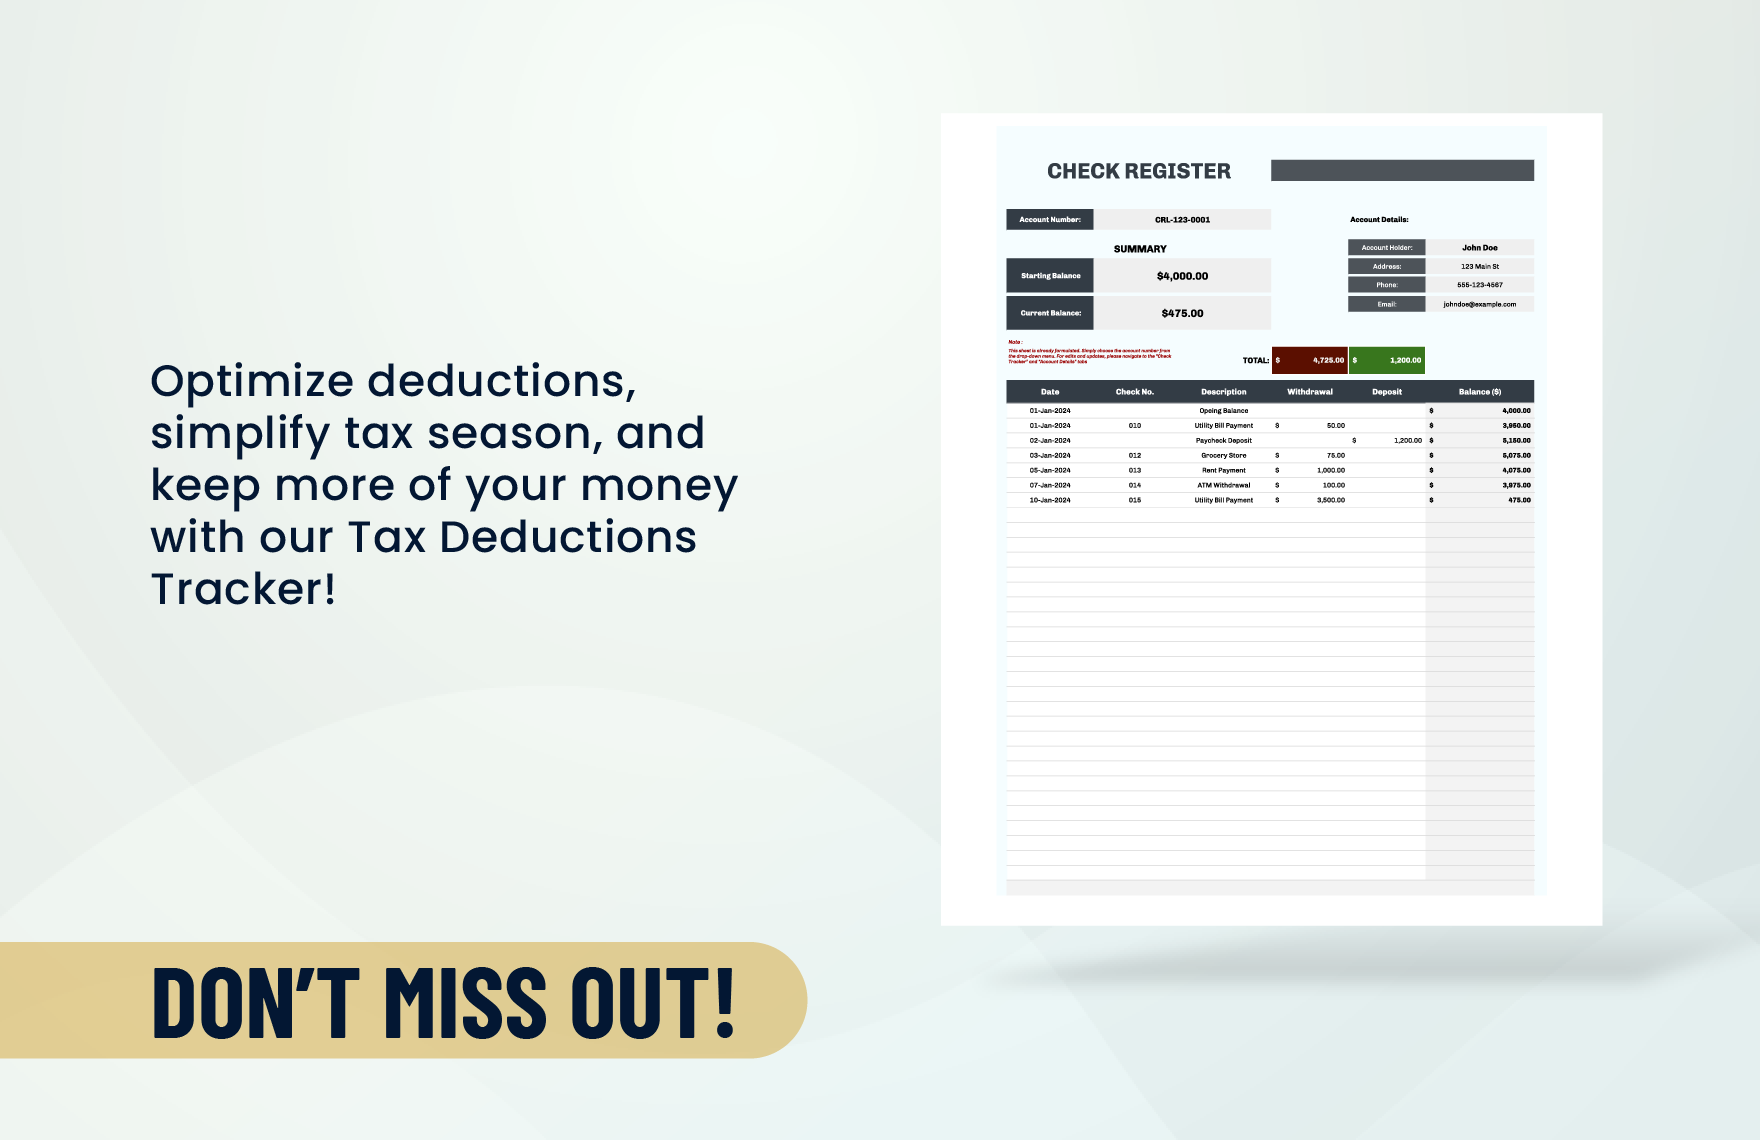 Check Register for Tax Deductions Template